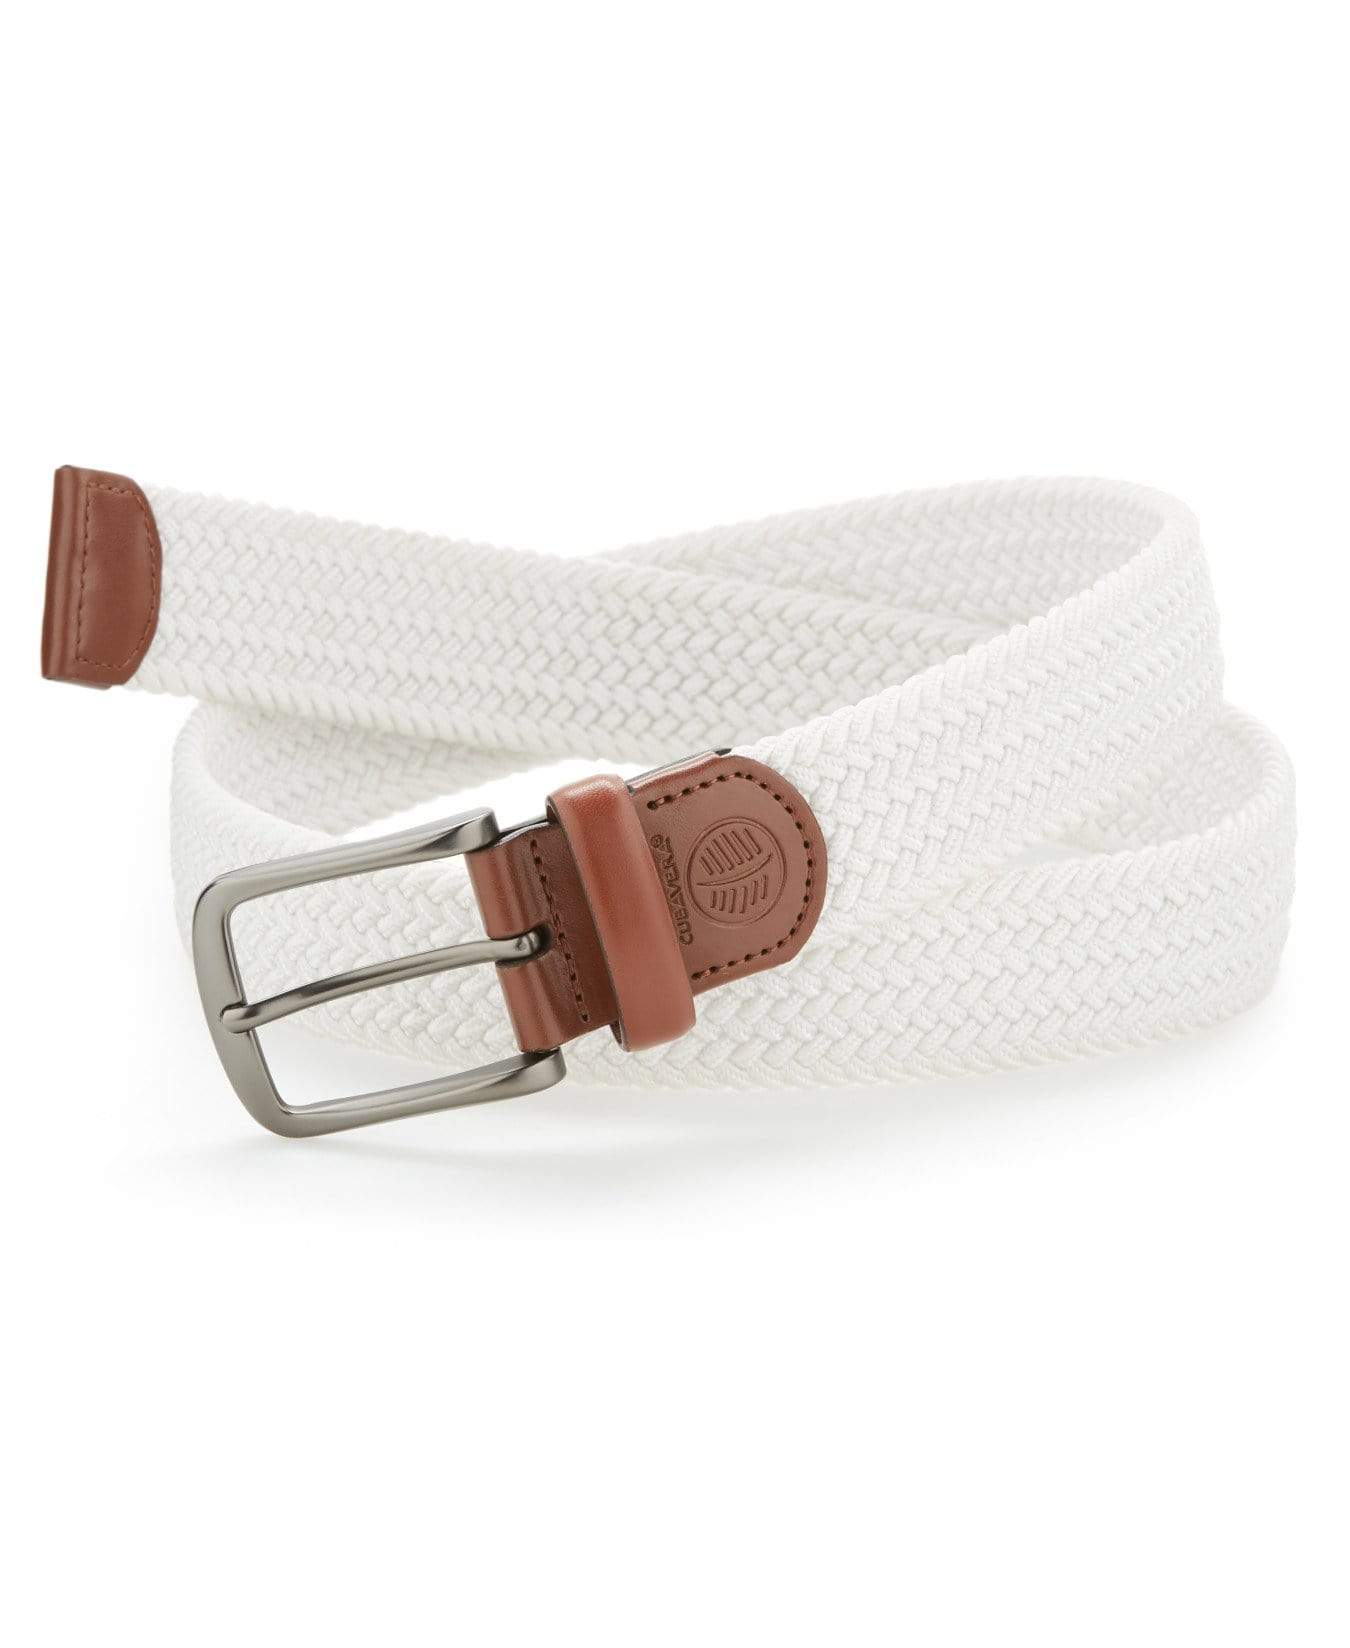 Burberry Belt With Horse Buckle Clearance, SAVE 40% 